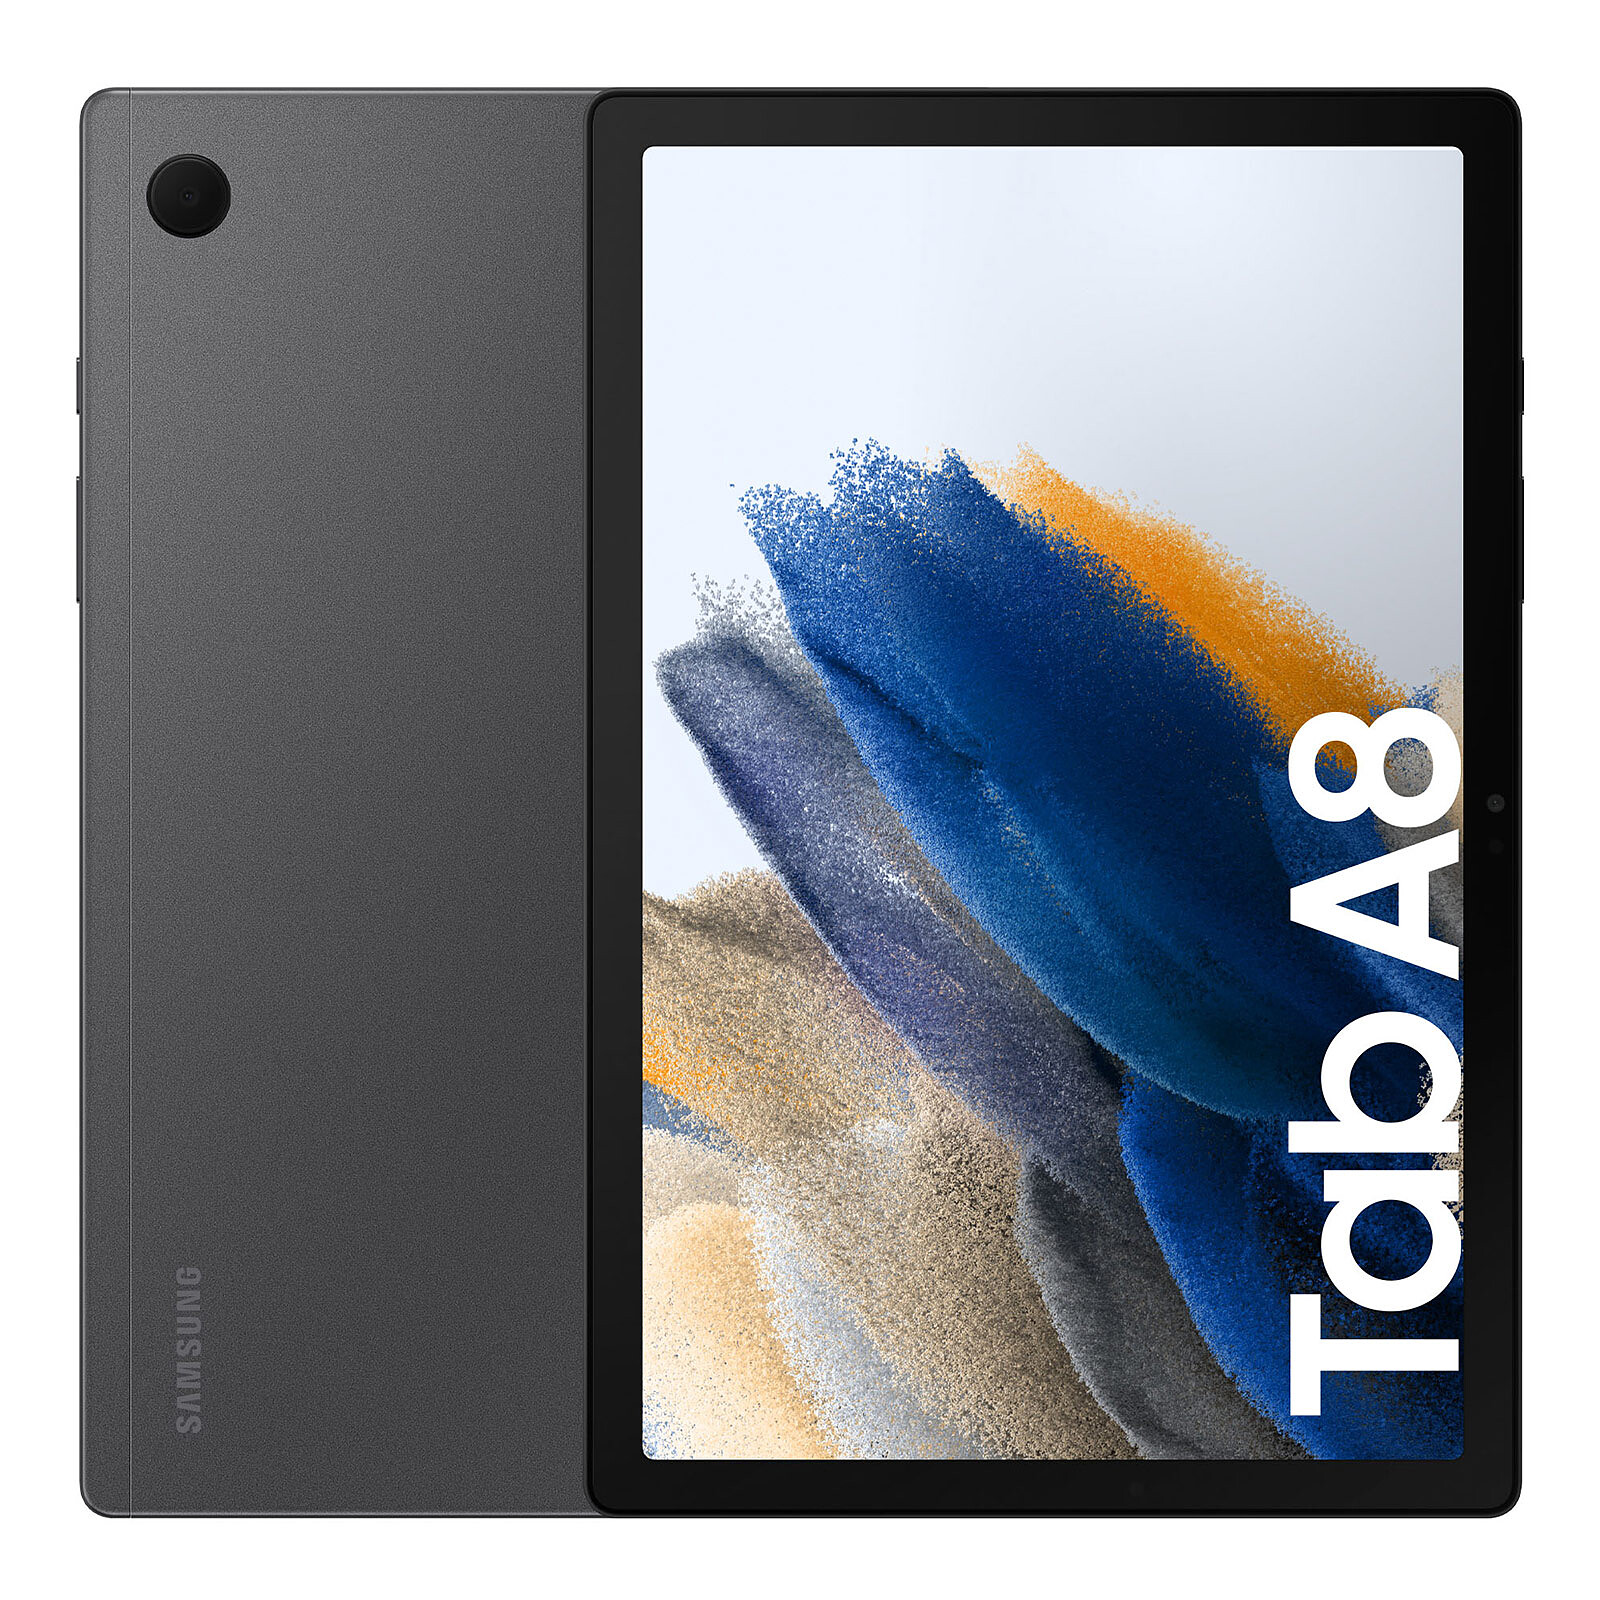 Samsung Galaxy Tab A8 10.5 128 Go Anthracite - Tablette tactile - Garantie  3 ans LDLC